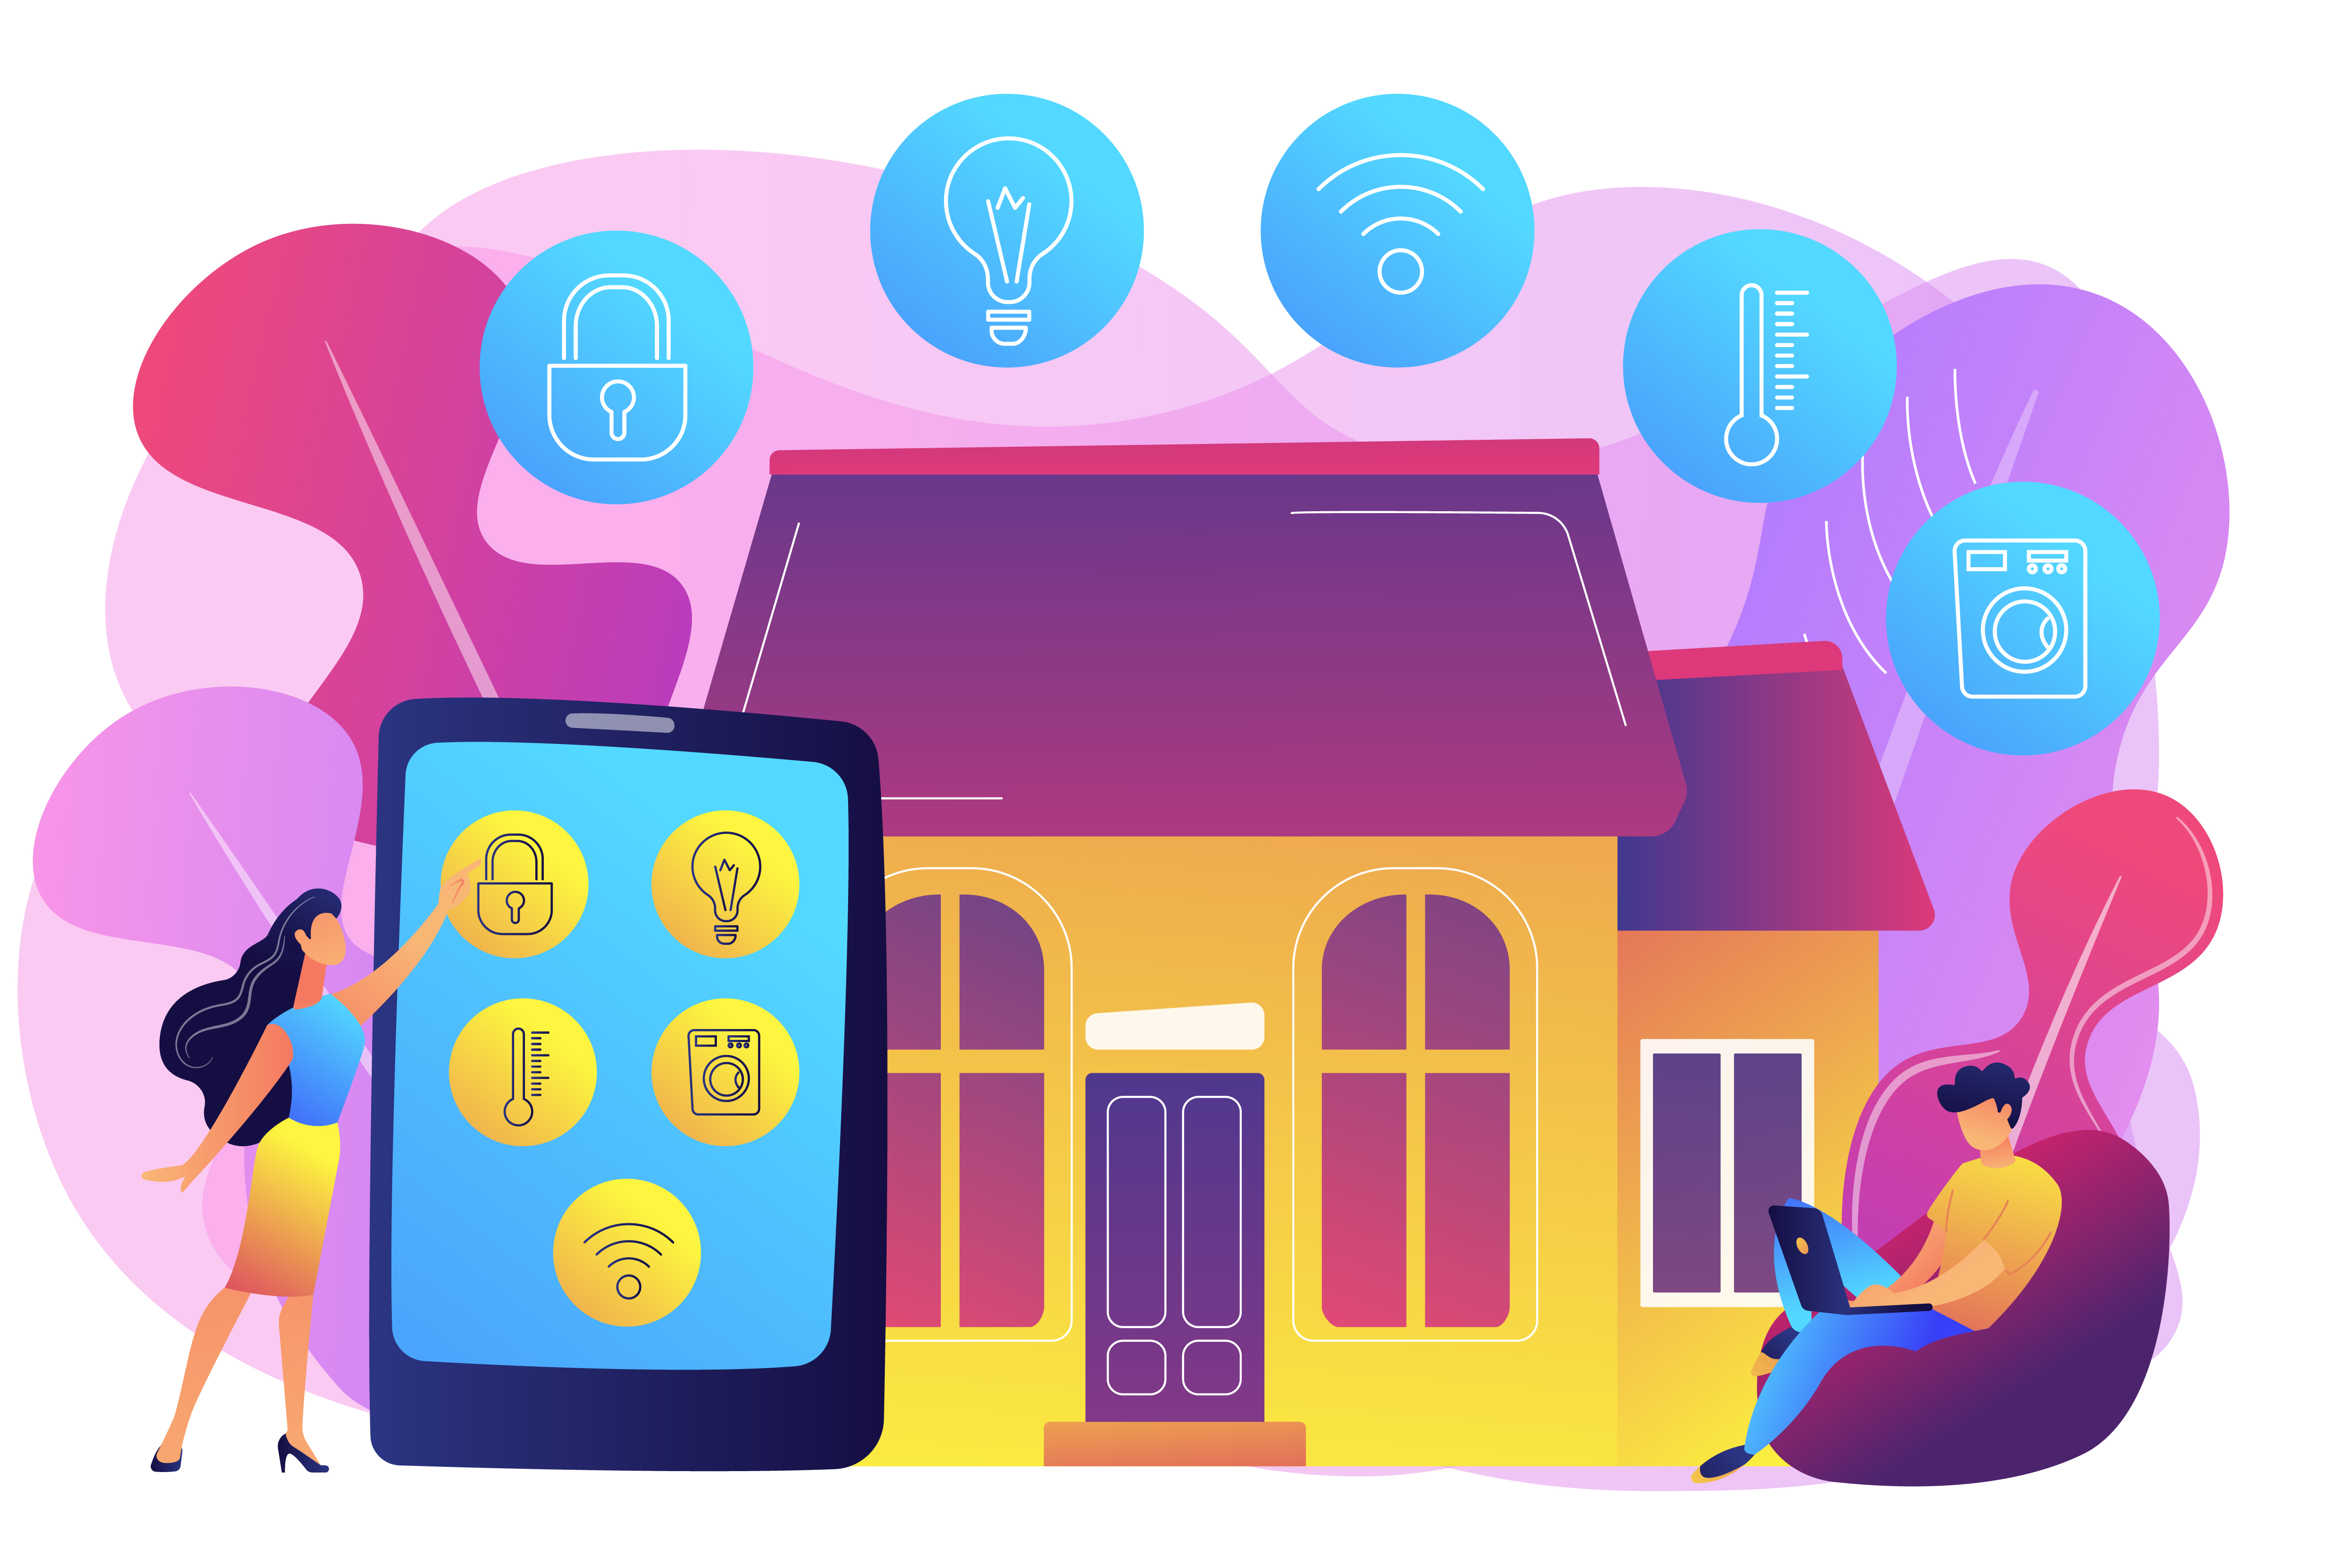 The benefits of using smart home technology to aid security